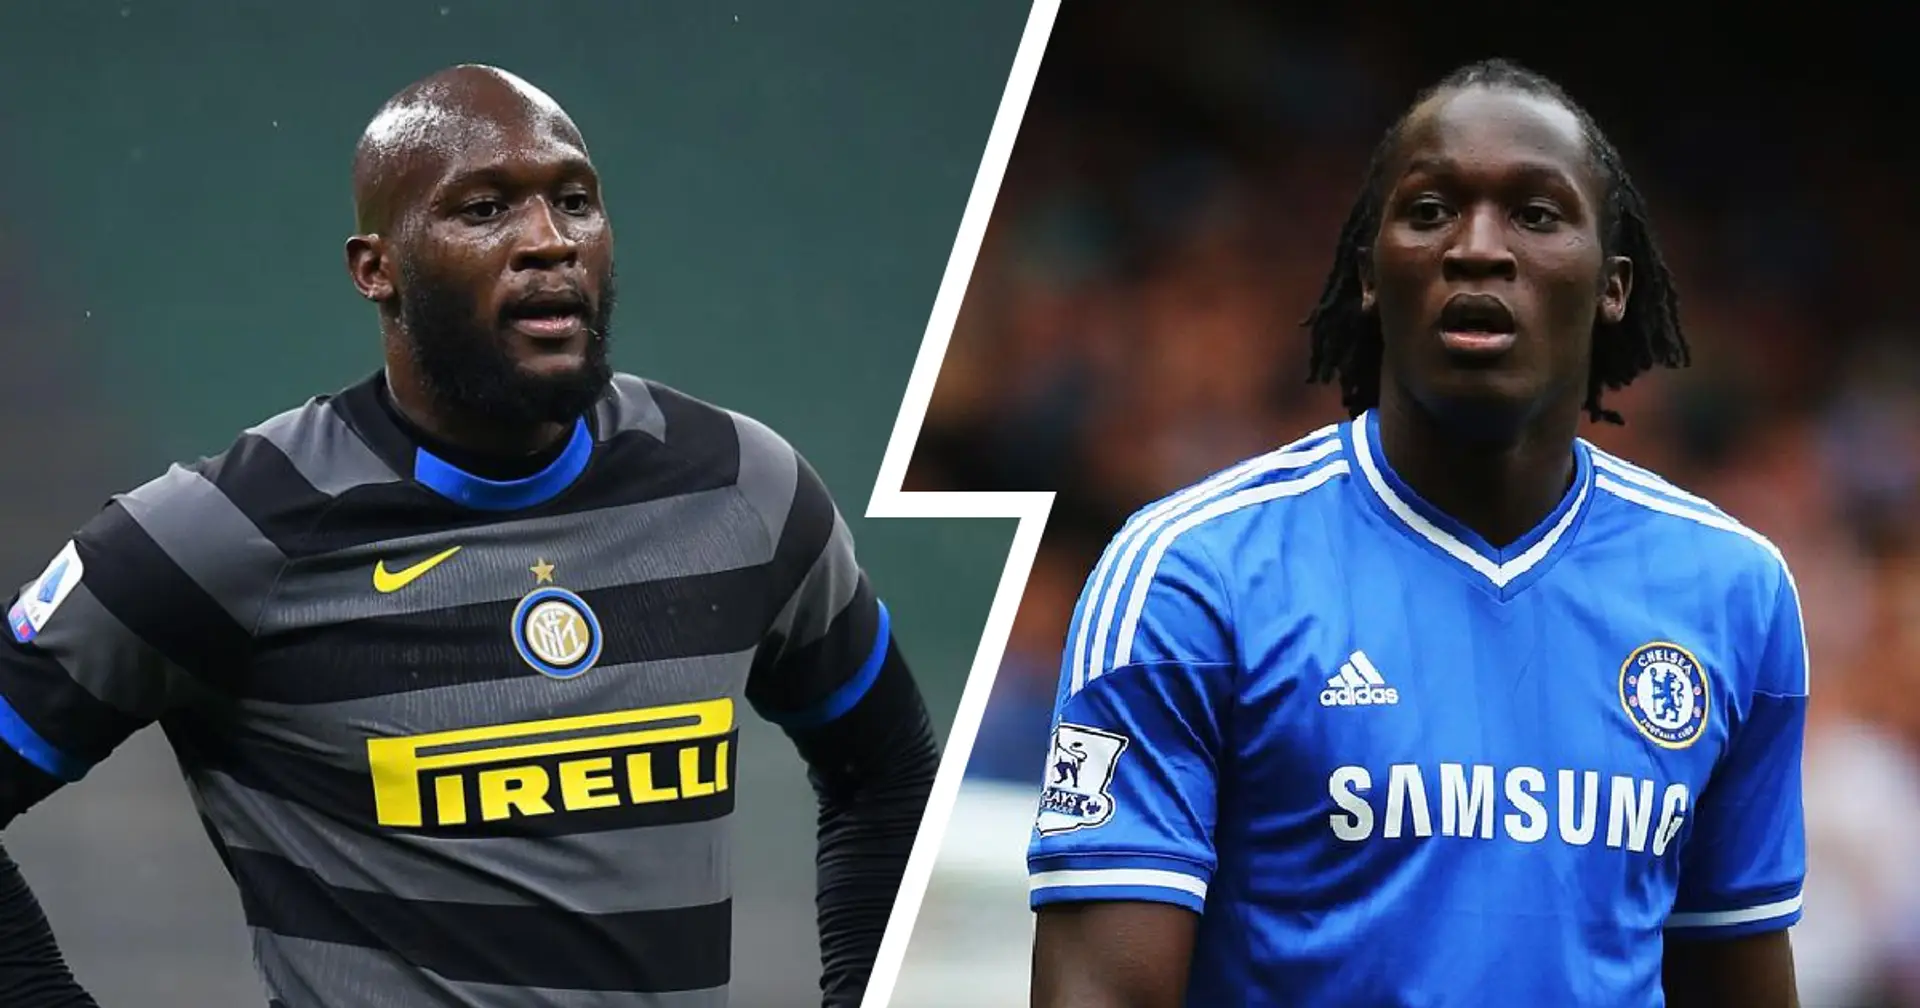 'He loves Chelsea too much': Ex-Blue Frank Lebouef's verdict on potential Lukaku signing